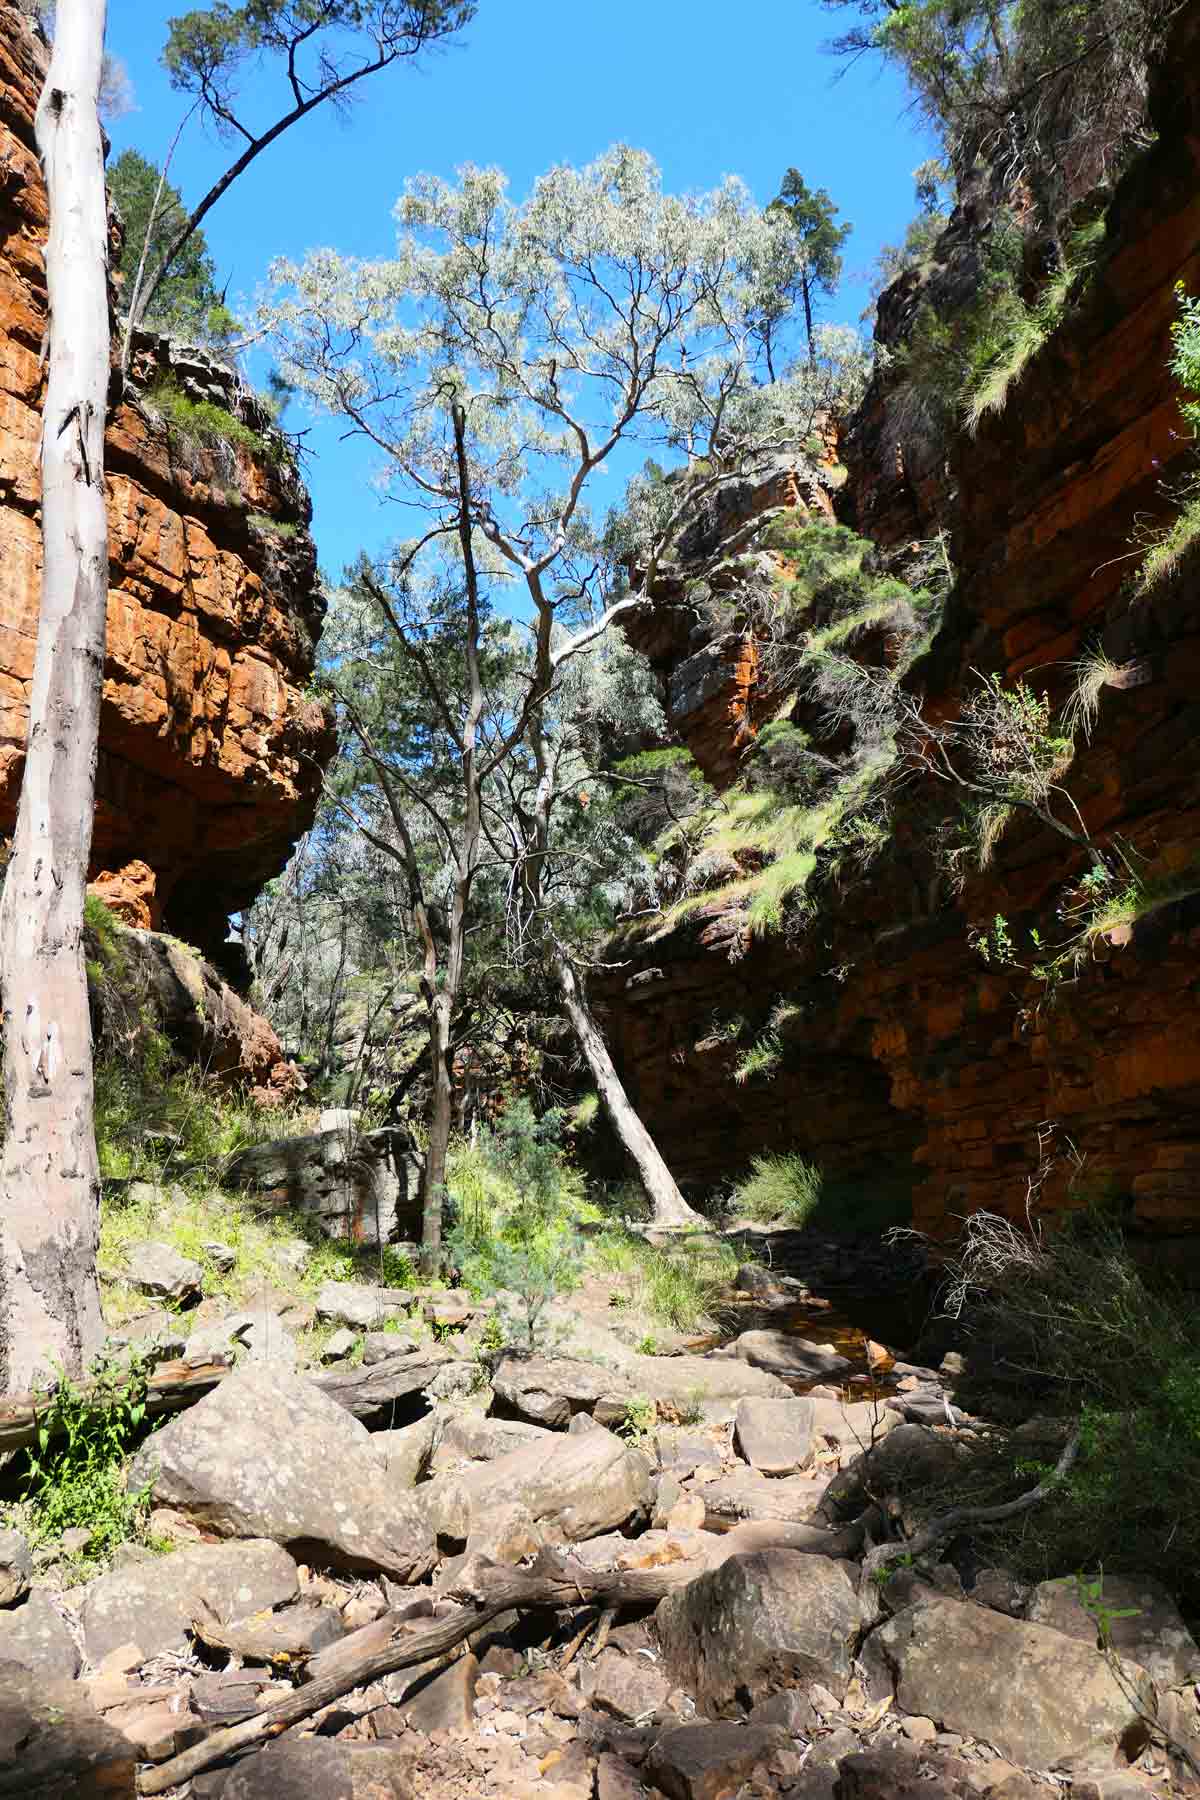 Walking along the creek bed at Alligator Gorge in Wilmington, South Australia